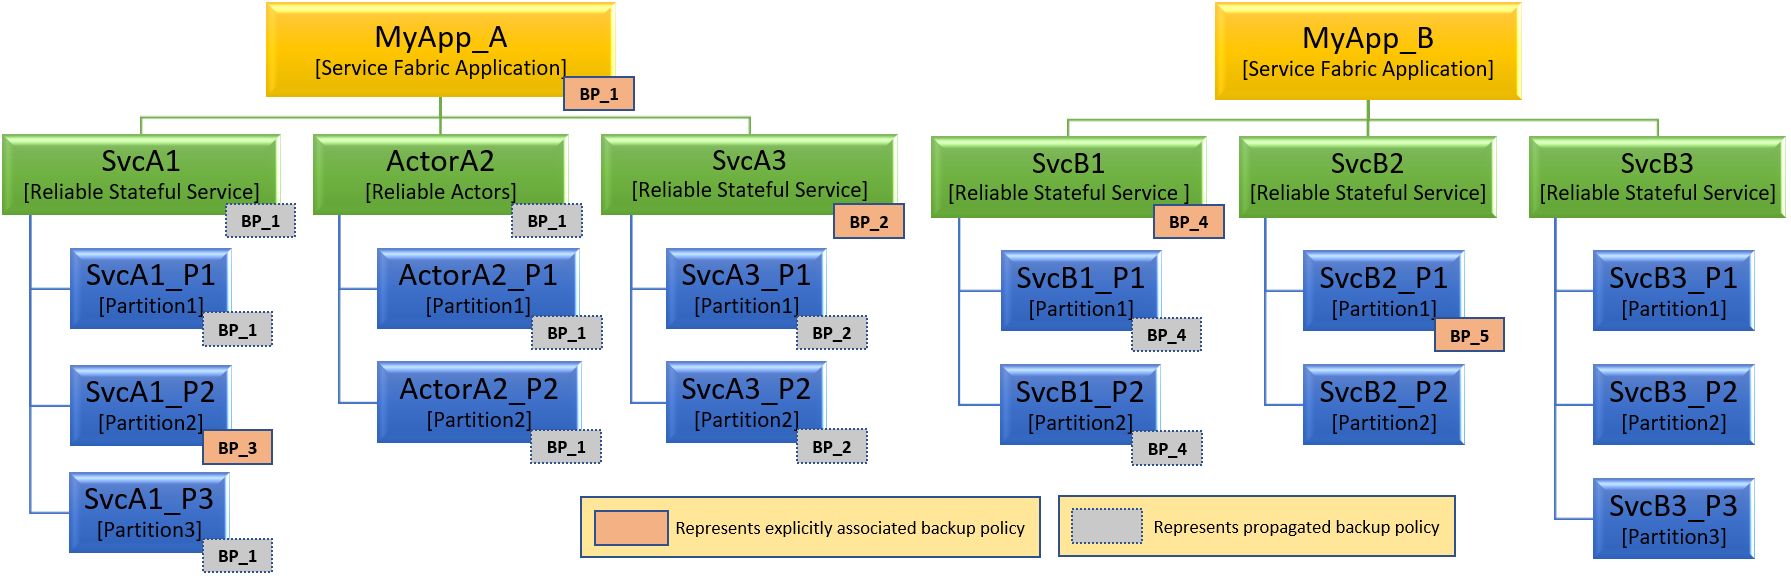 Service Fabric Application Hierarchy